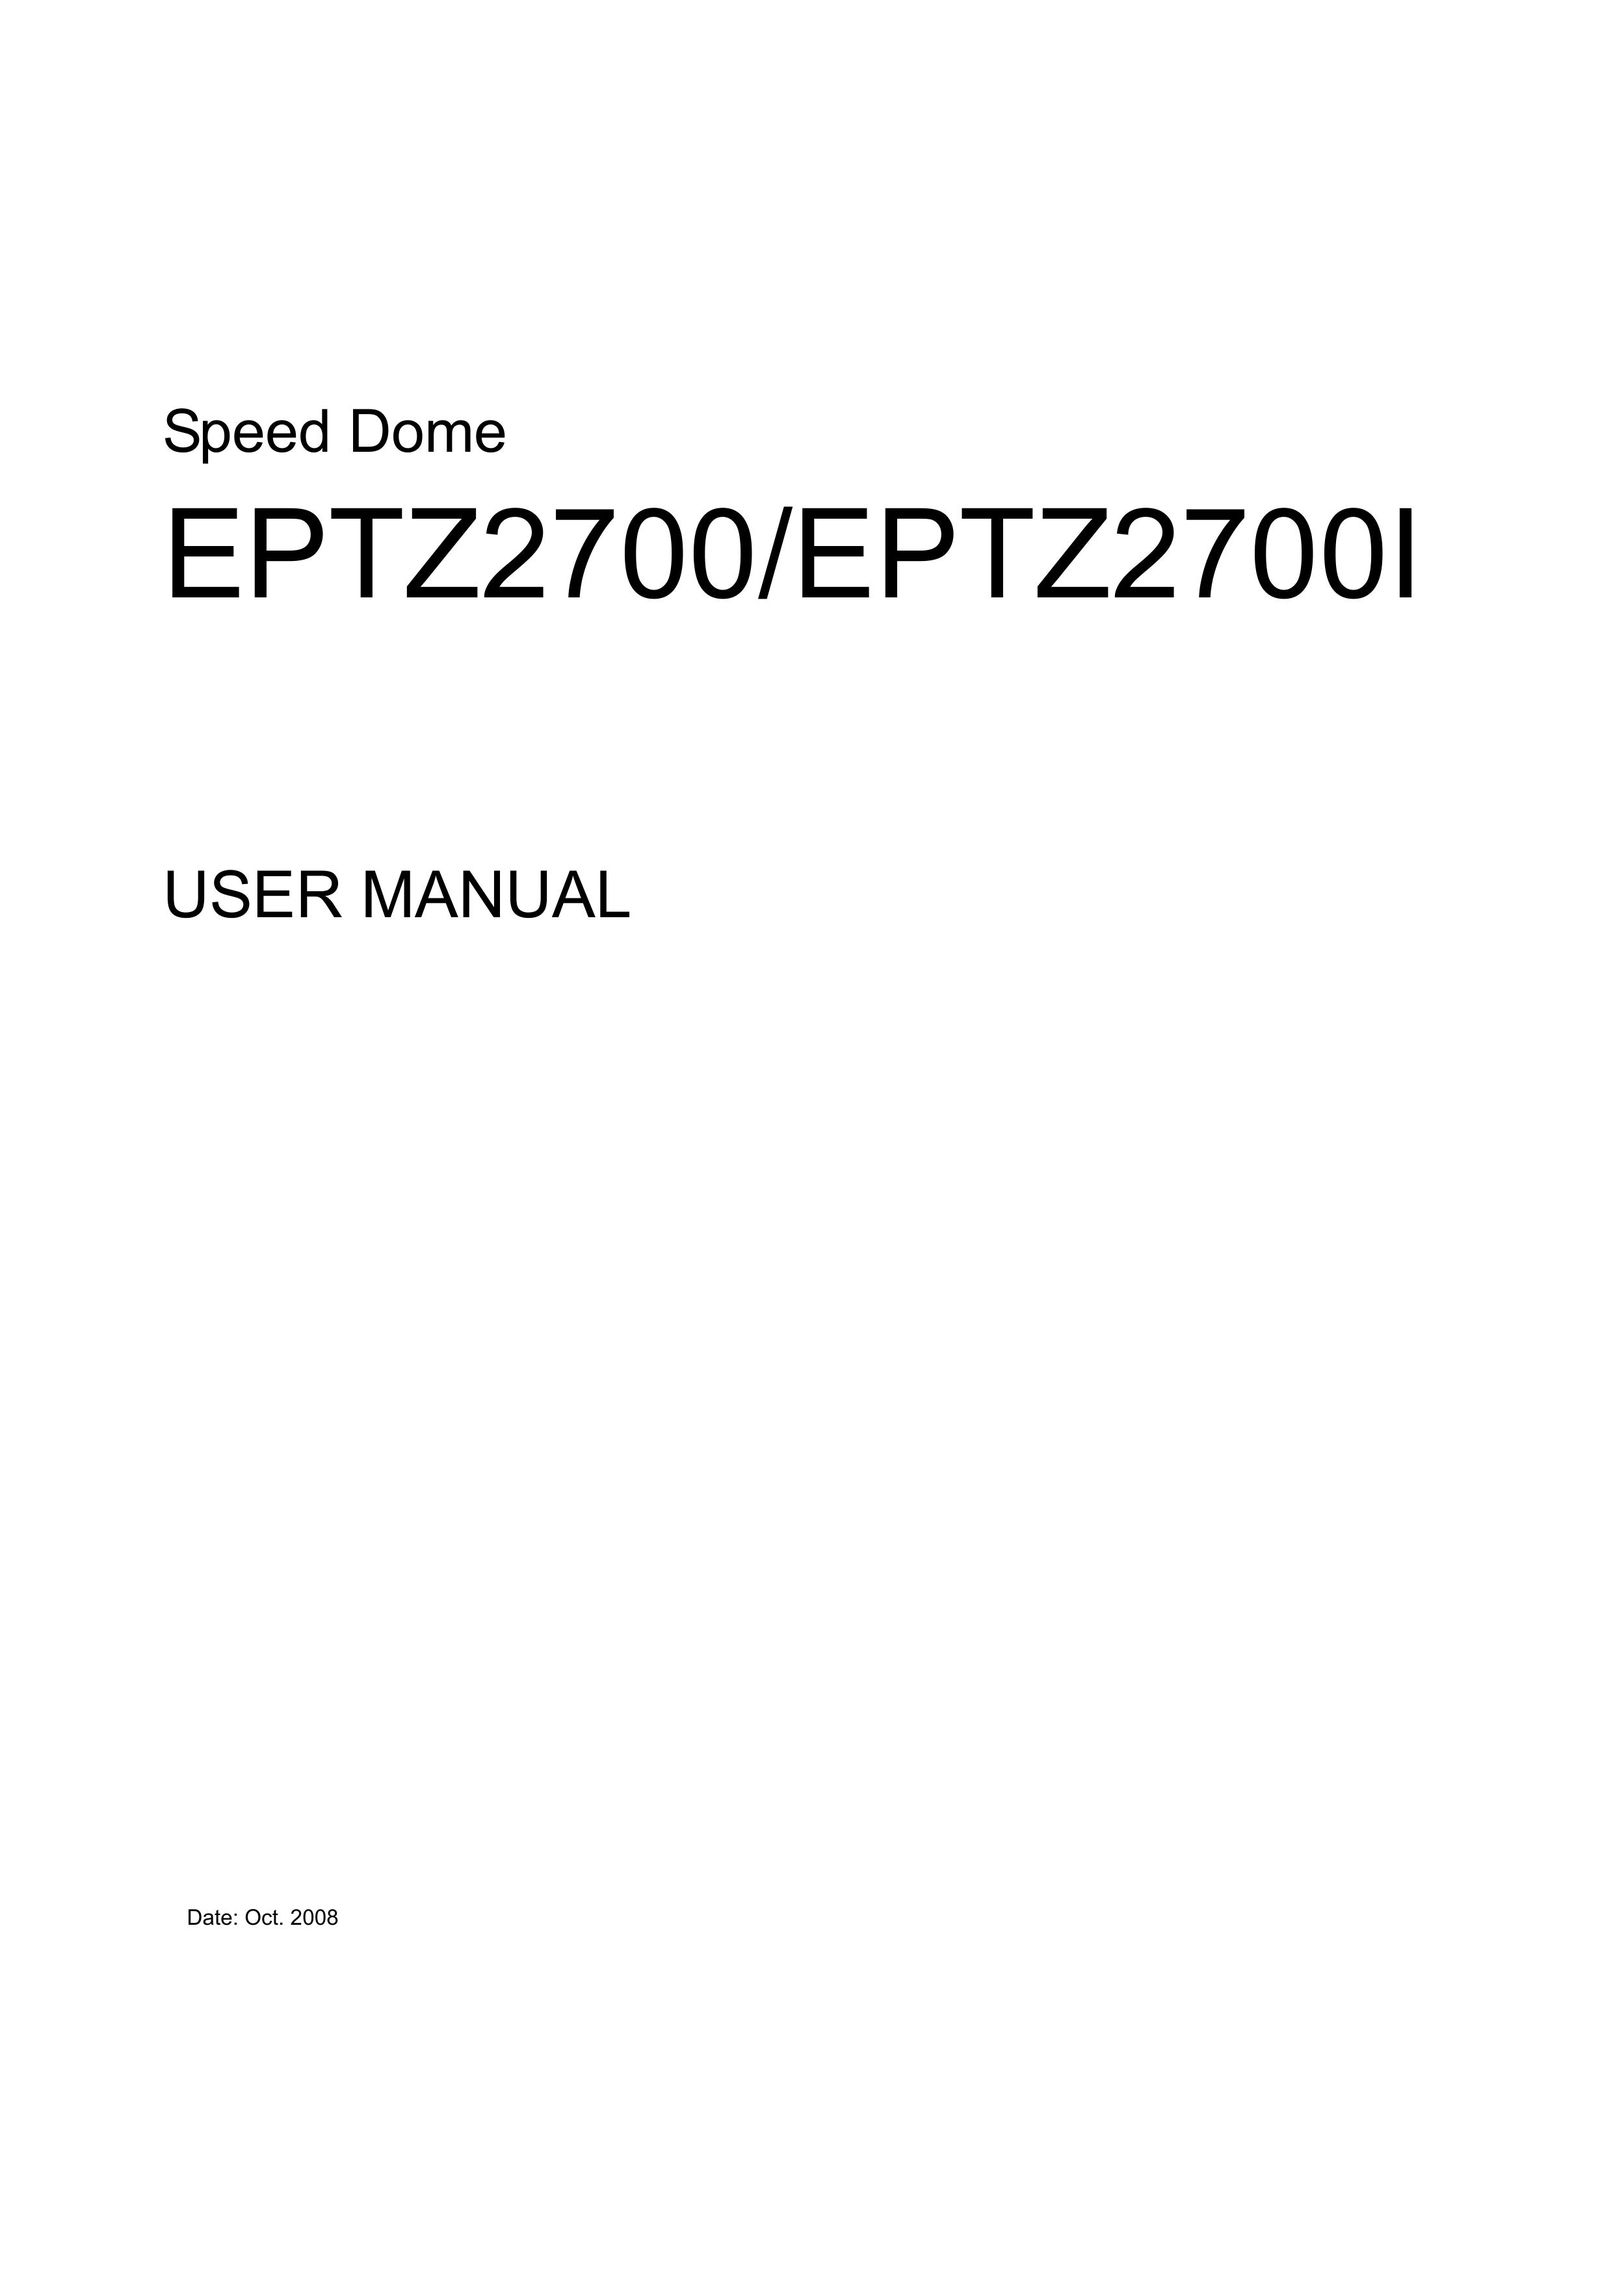 EverFocus EPTZ2700 Home Security System User Manual